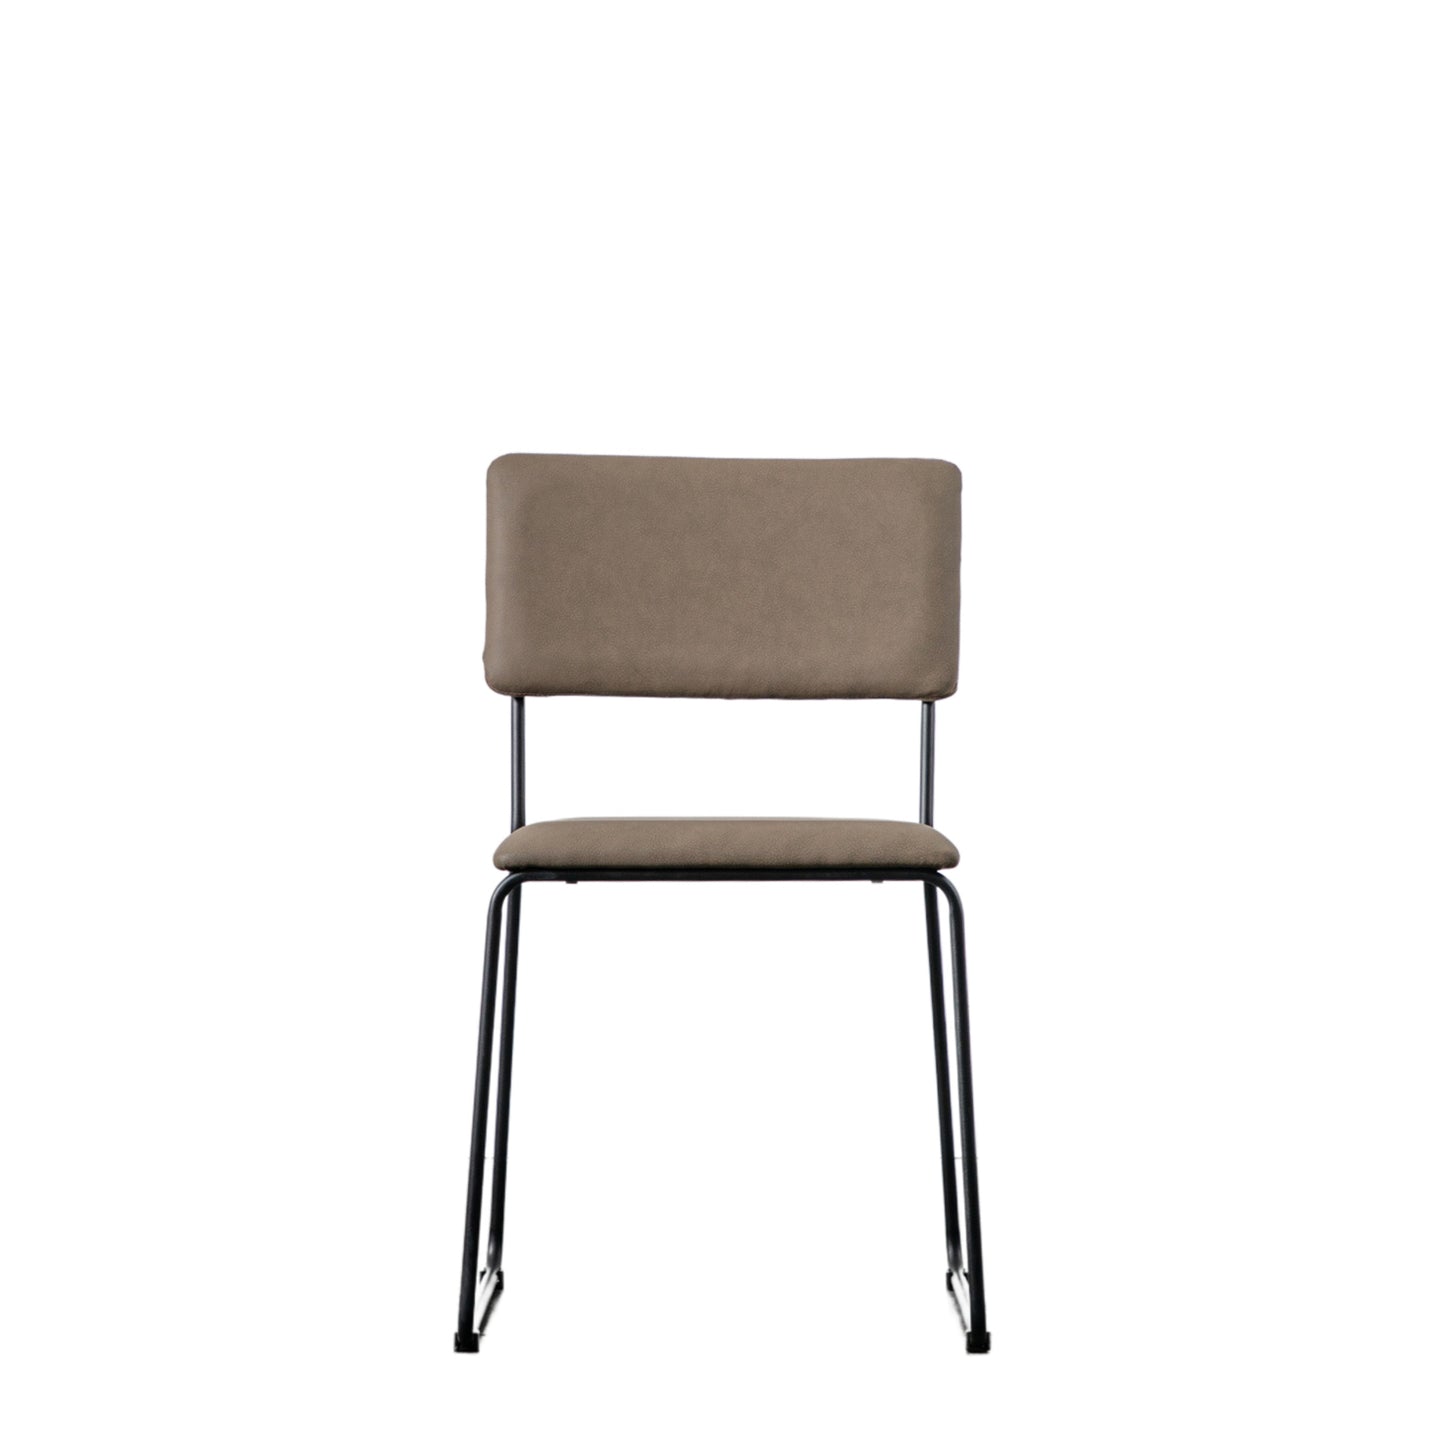 A Chivelstone Dining Chair Oatmeal (2pk) with a black frame and a beige upholstered seat perfect for interior decor.